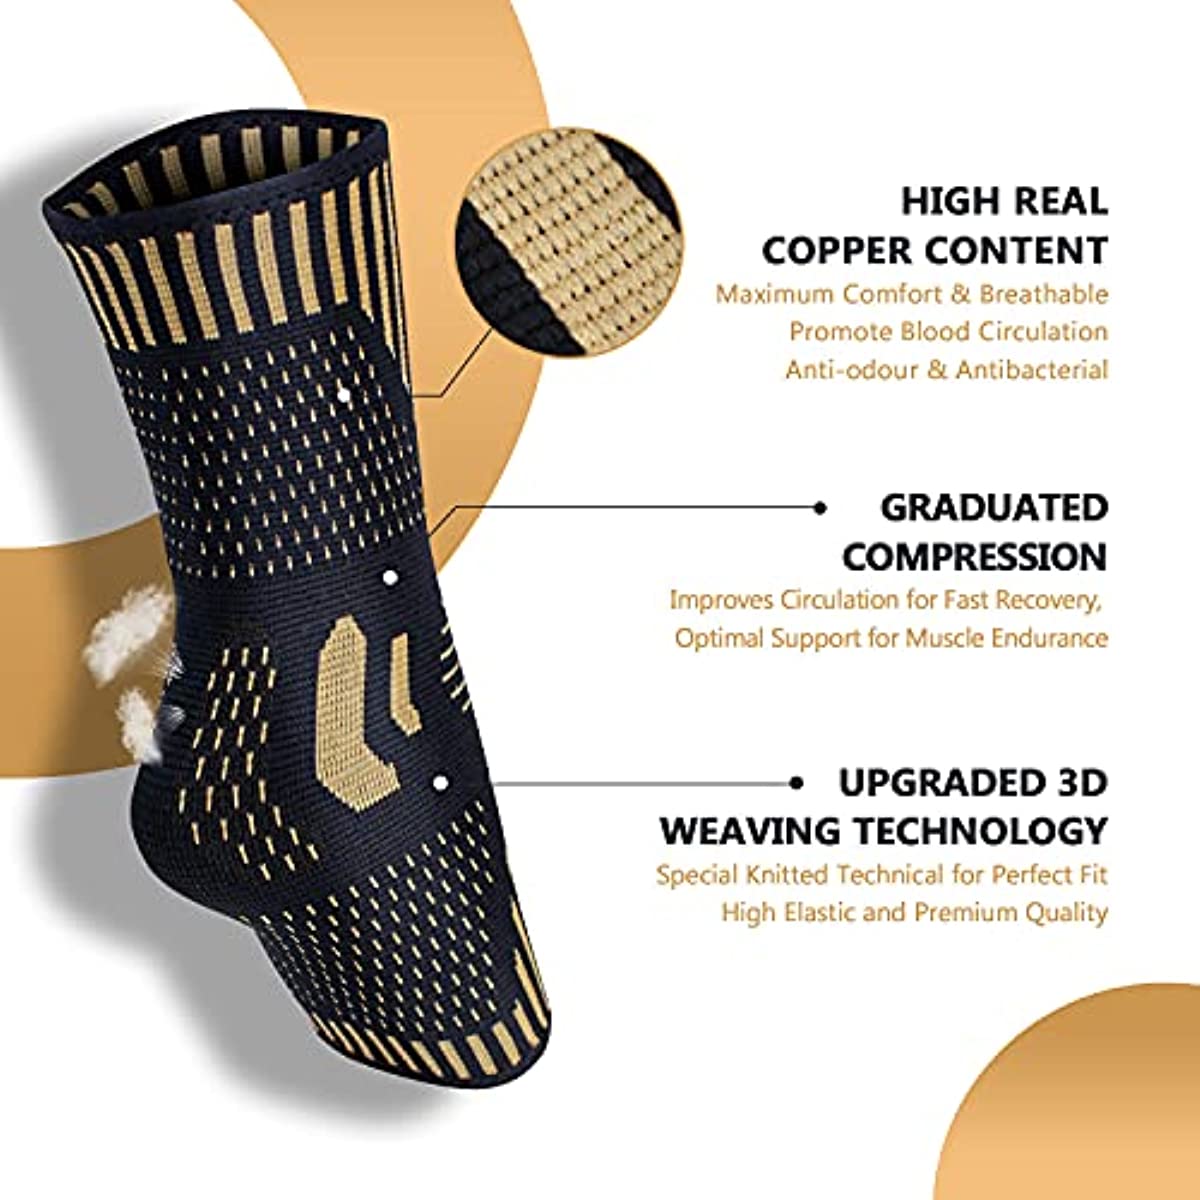 Copper Ankle Brace Support for Men & Women (Pair), Best Ankle Compression Sleeve Socks for Plantar Fasciitis, Sprained Ankle, Achilles Tendon, Pain Relief, Recovery, Sports